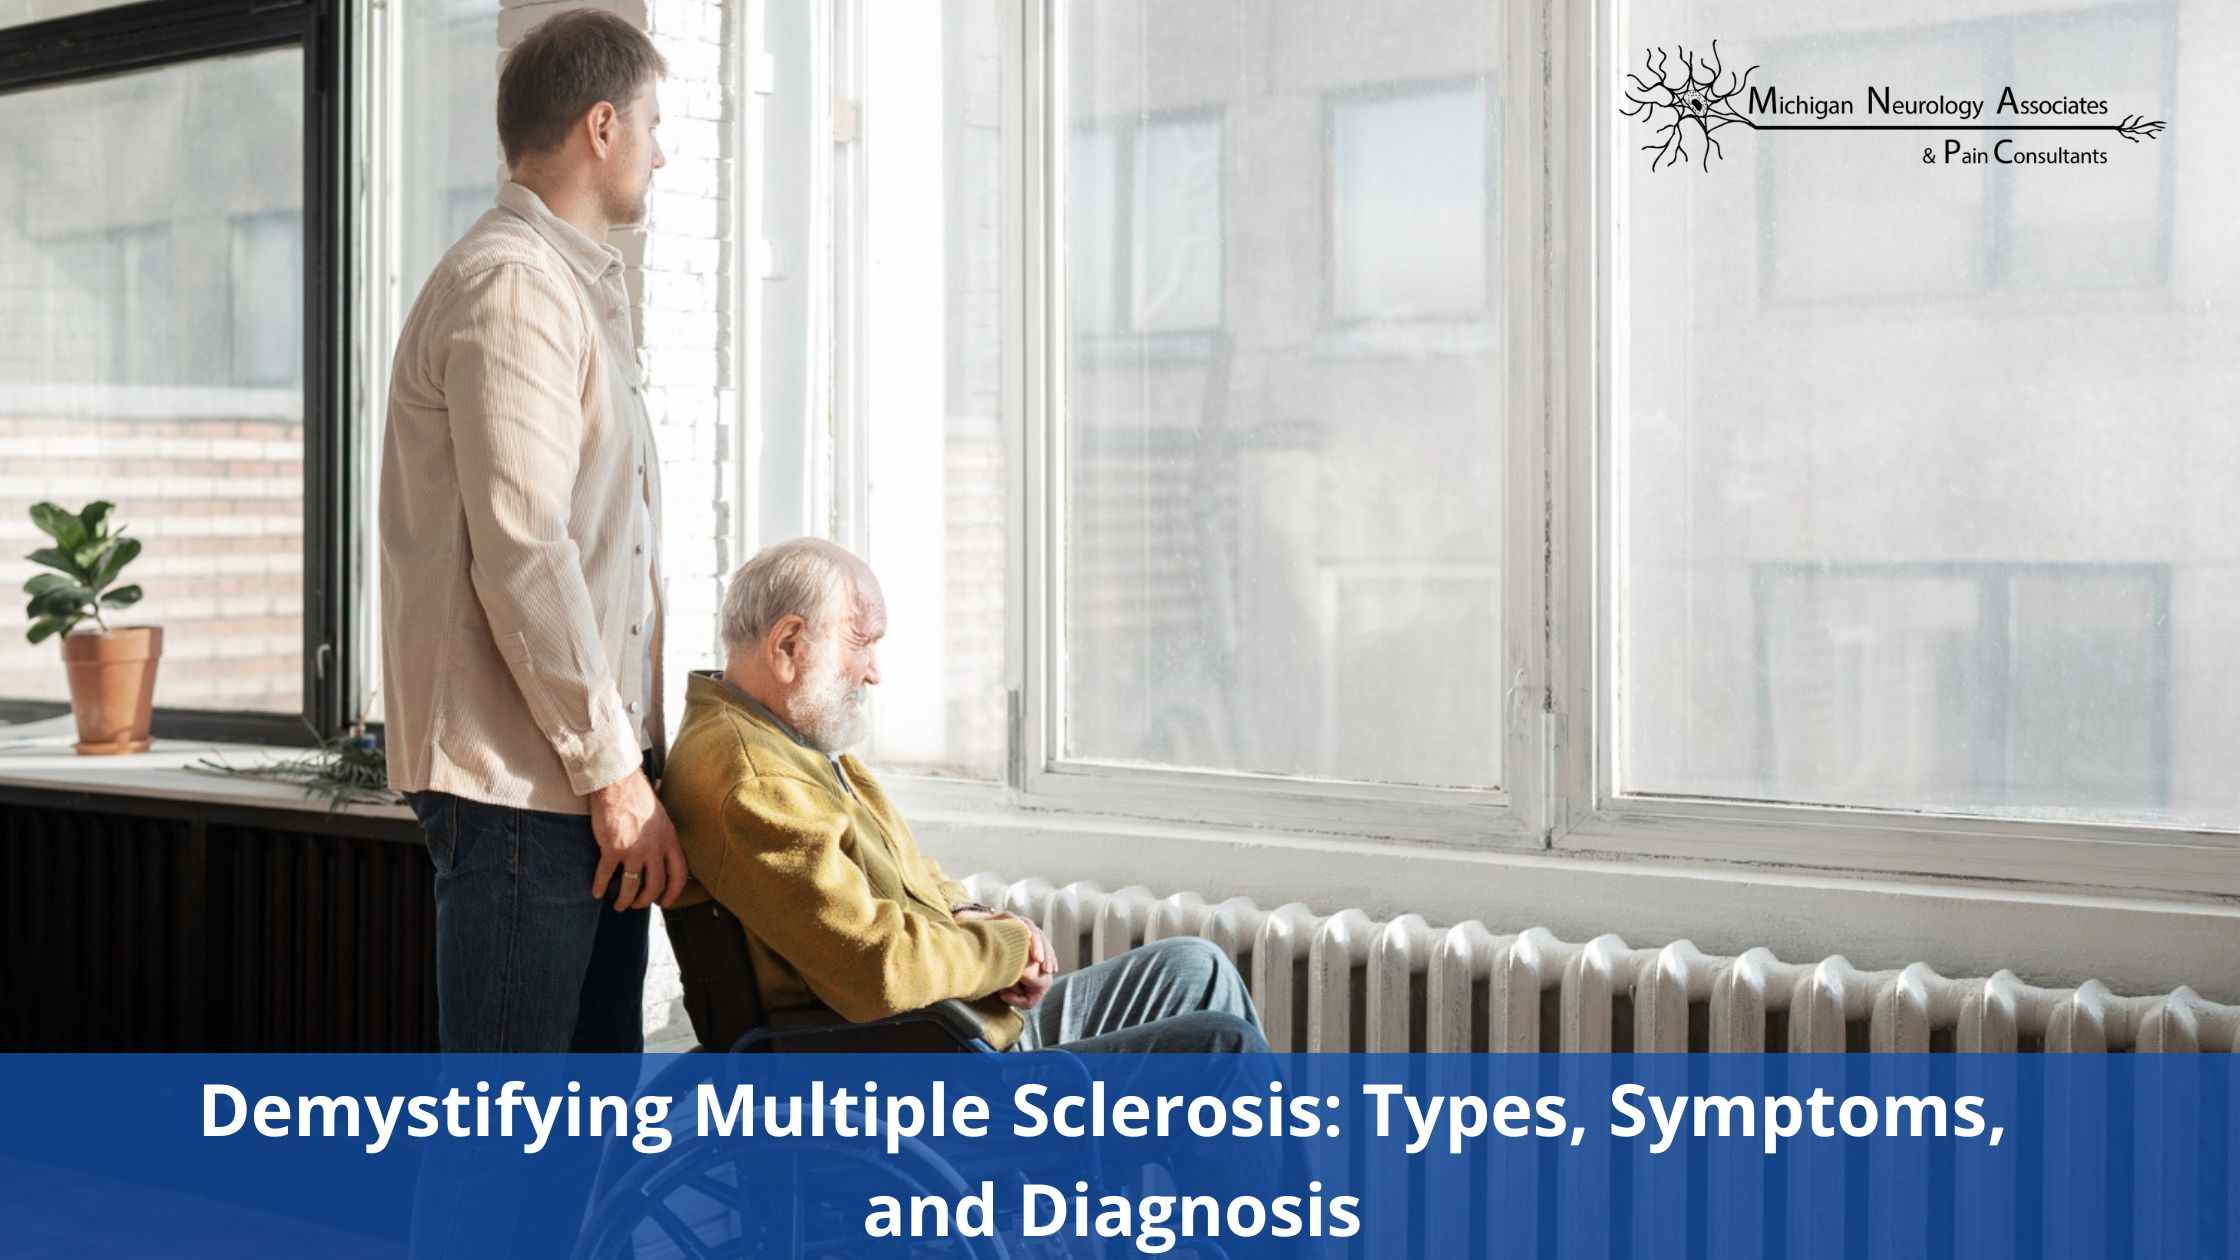 Demystifying Multiple Sclerosis: Types, Symptoms, and Diagnosis